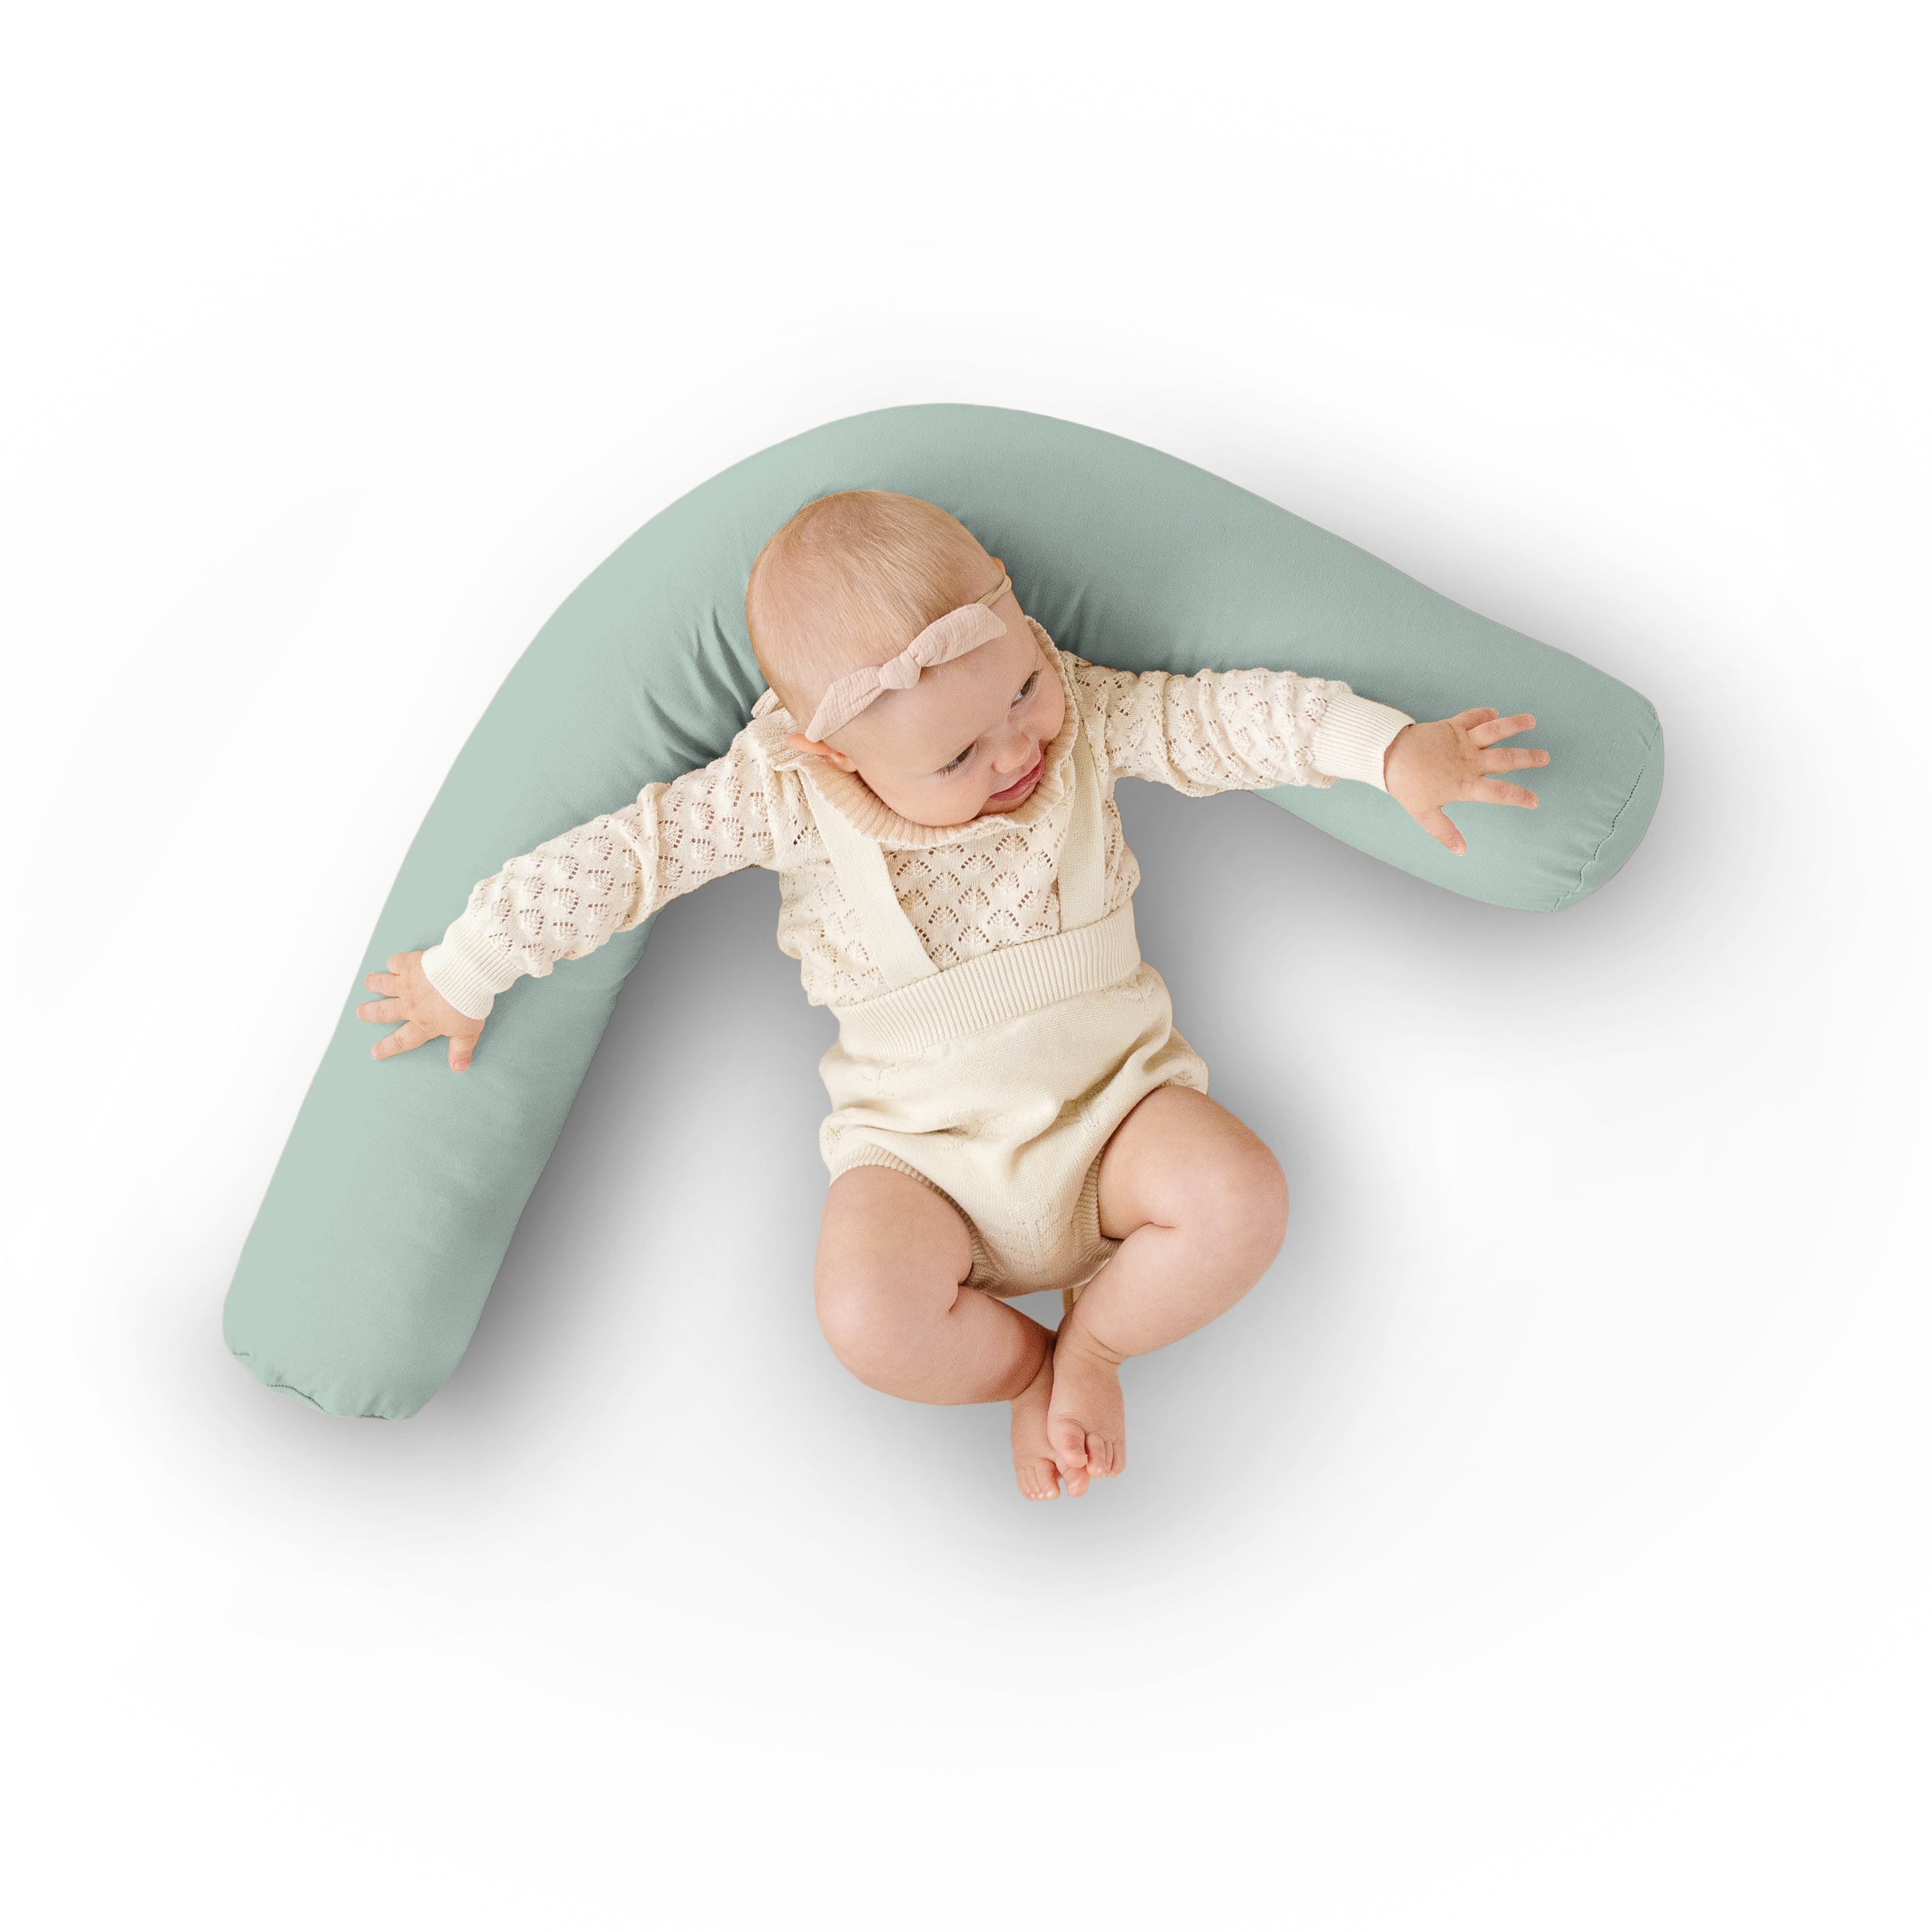 Sage Support Pillow